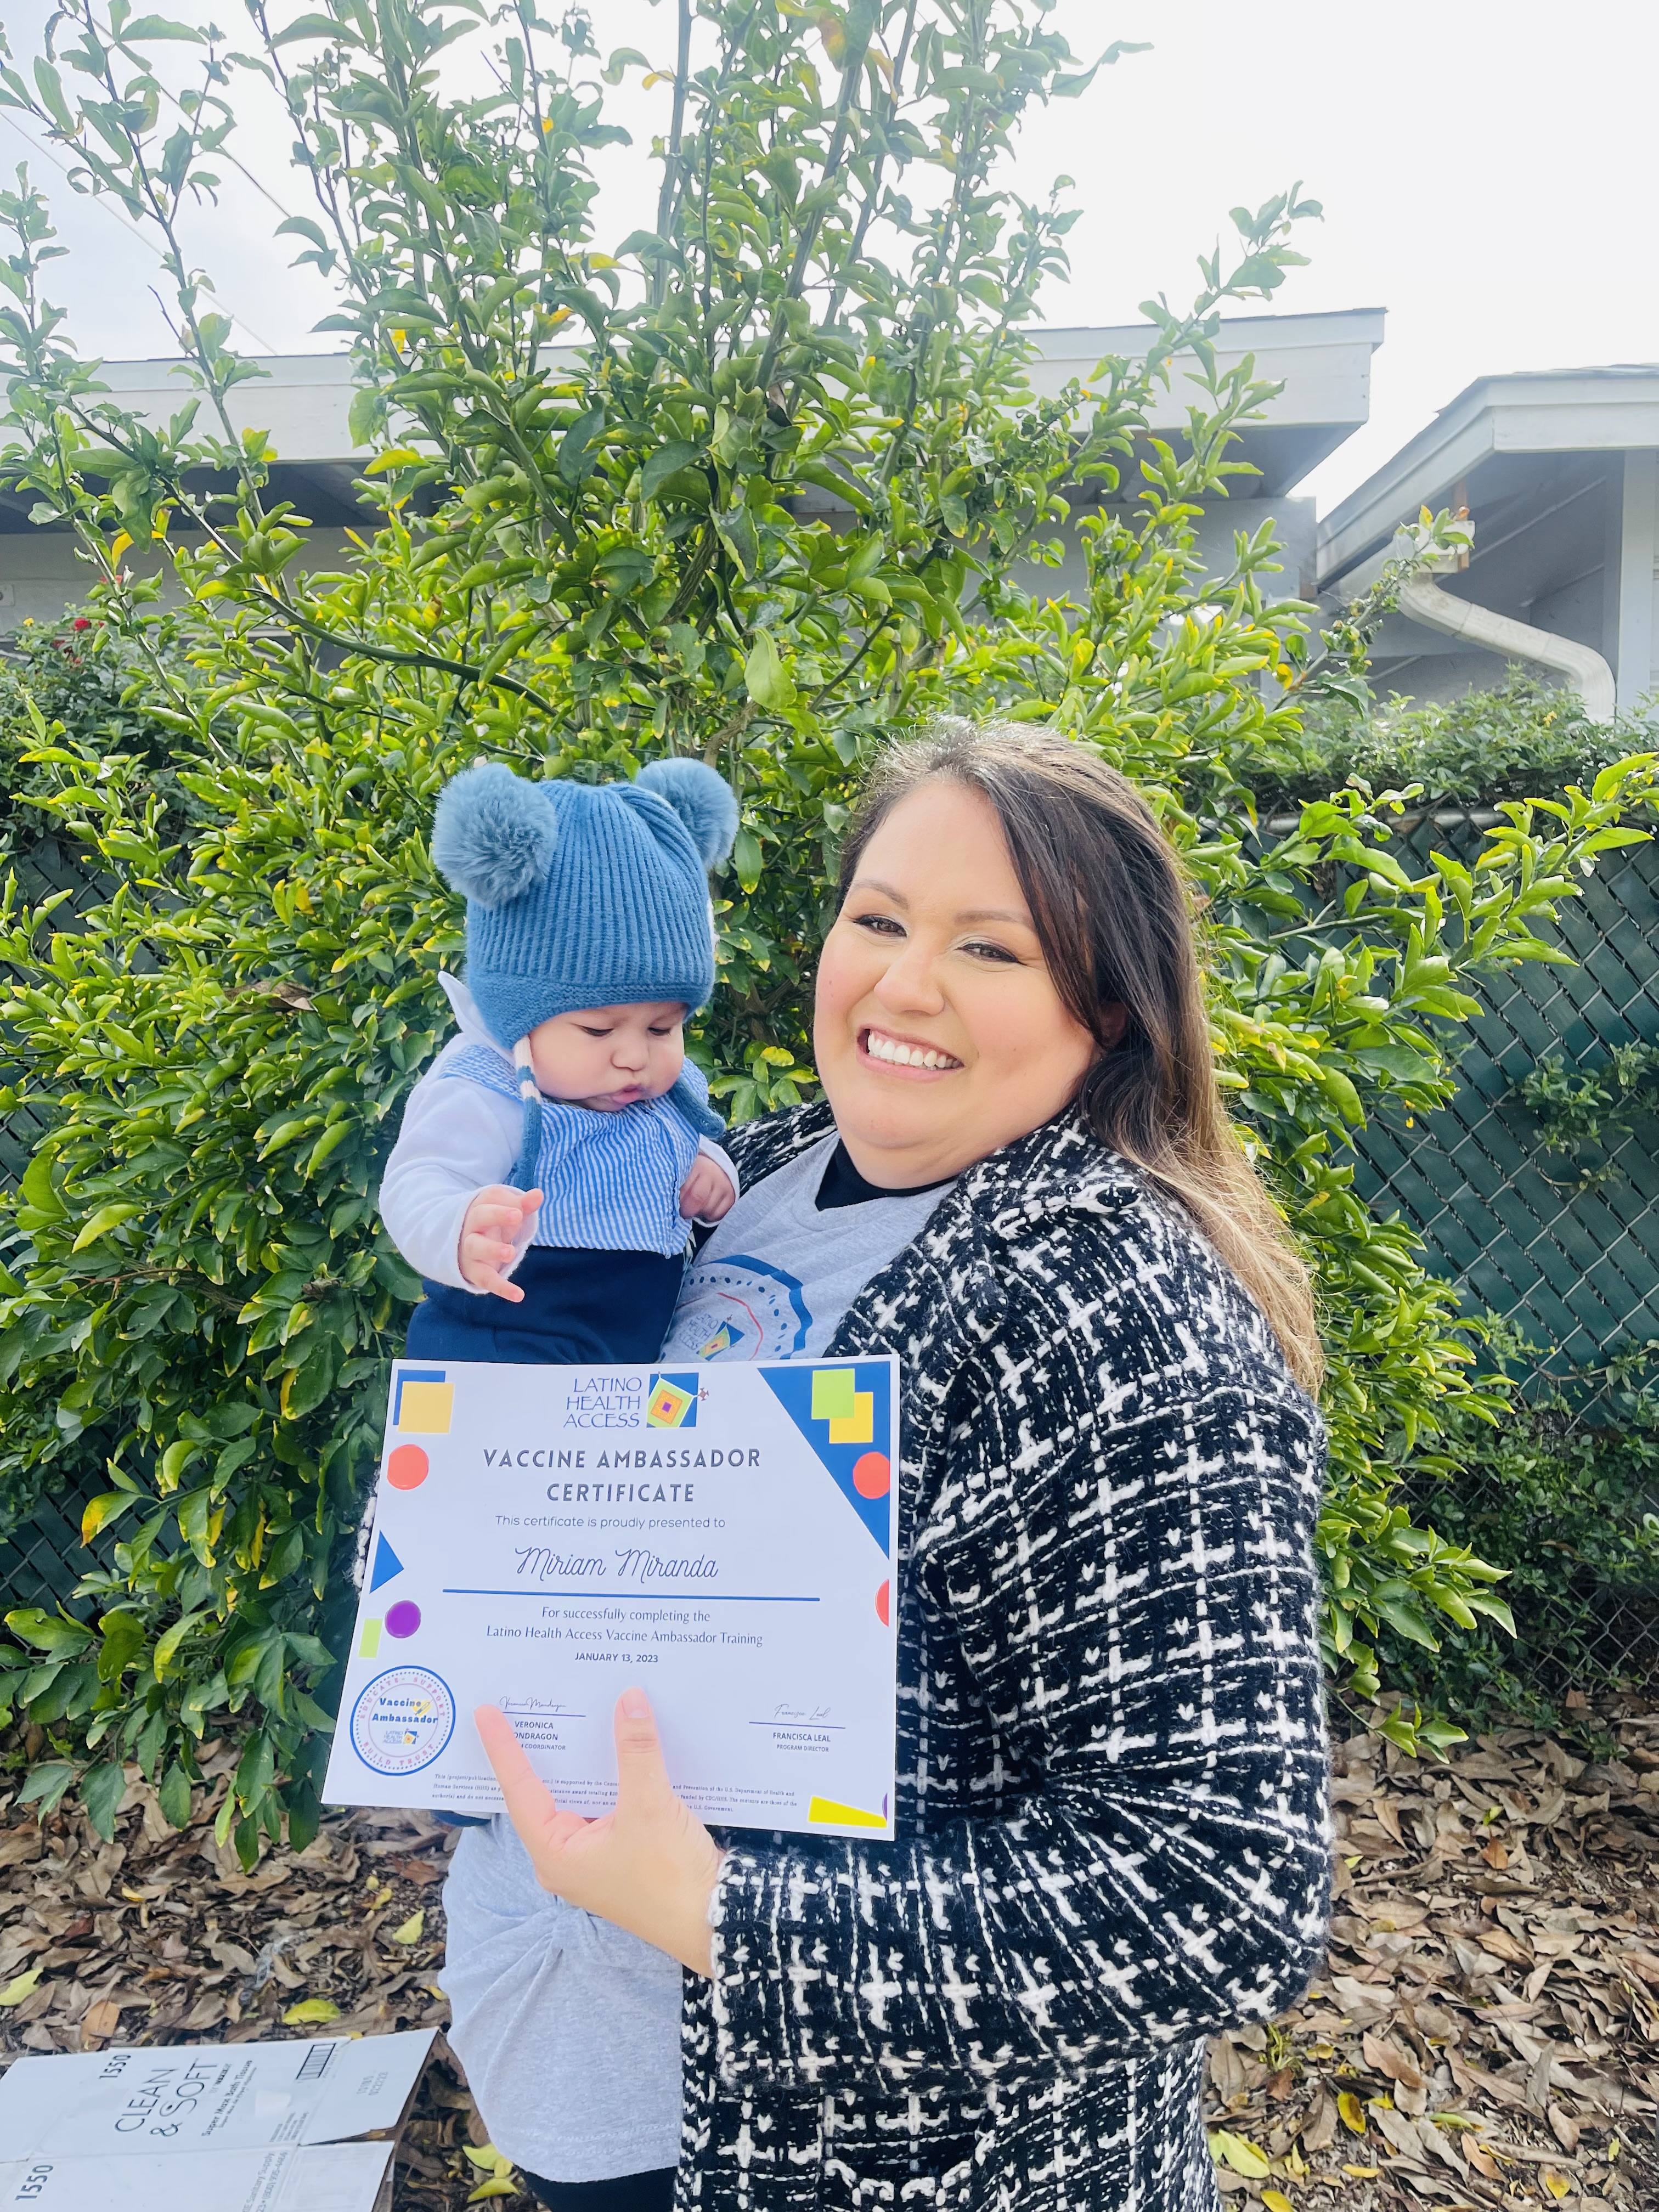 A mother holds her baby and also holds a vaccine ambassador certificate